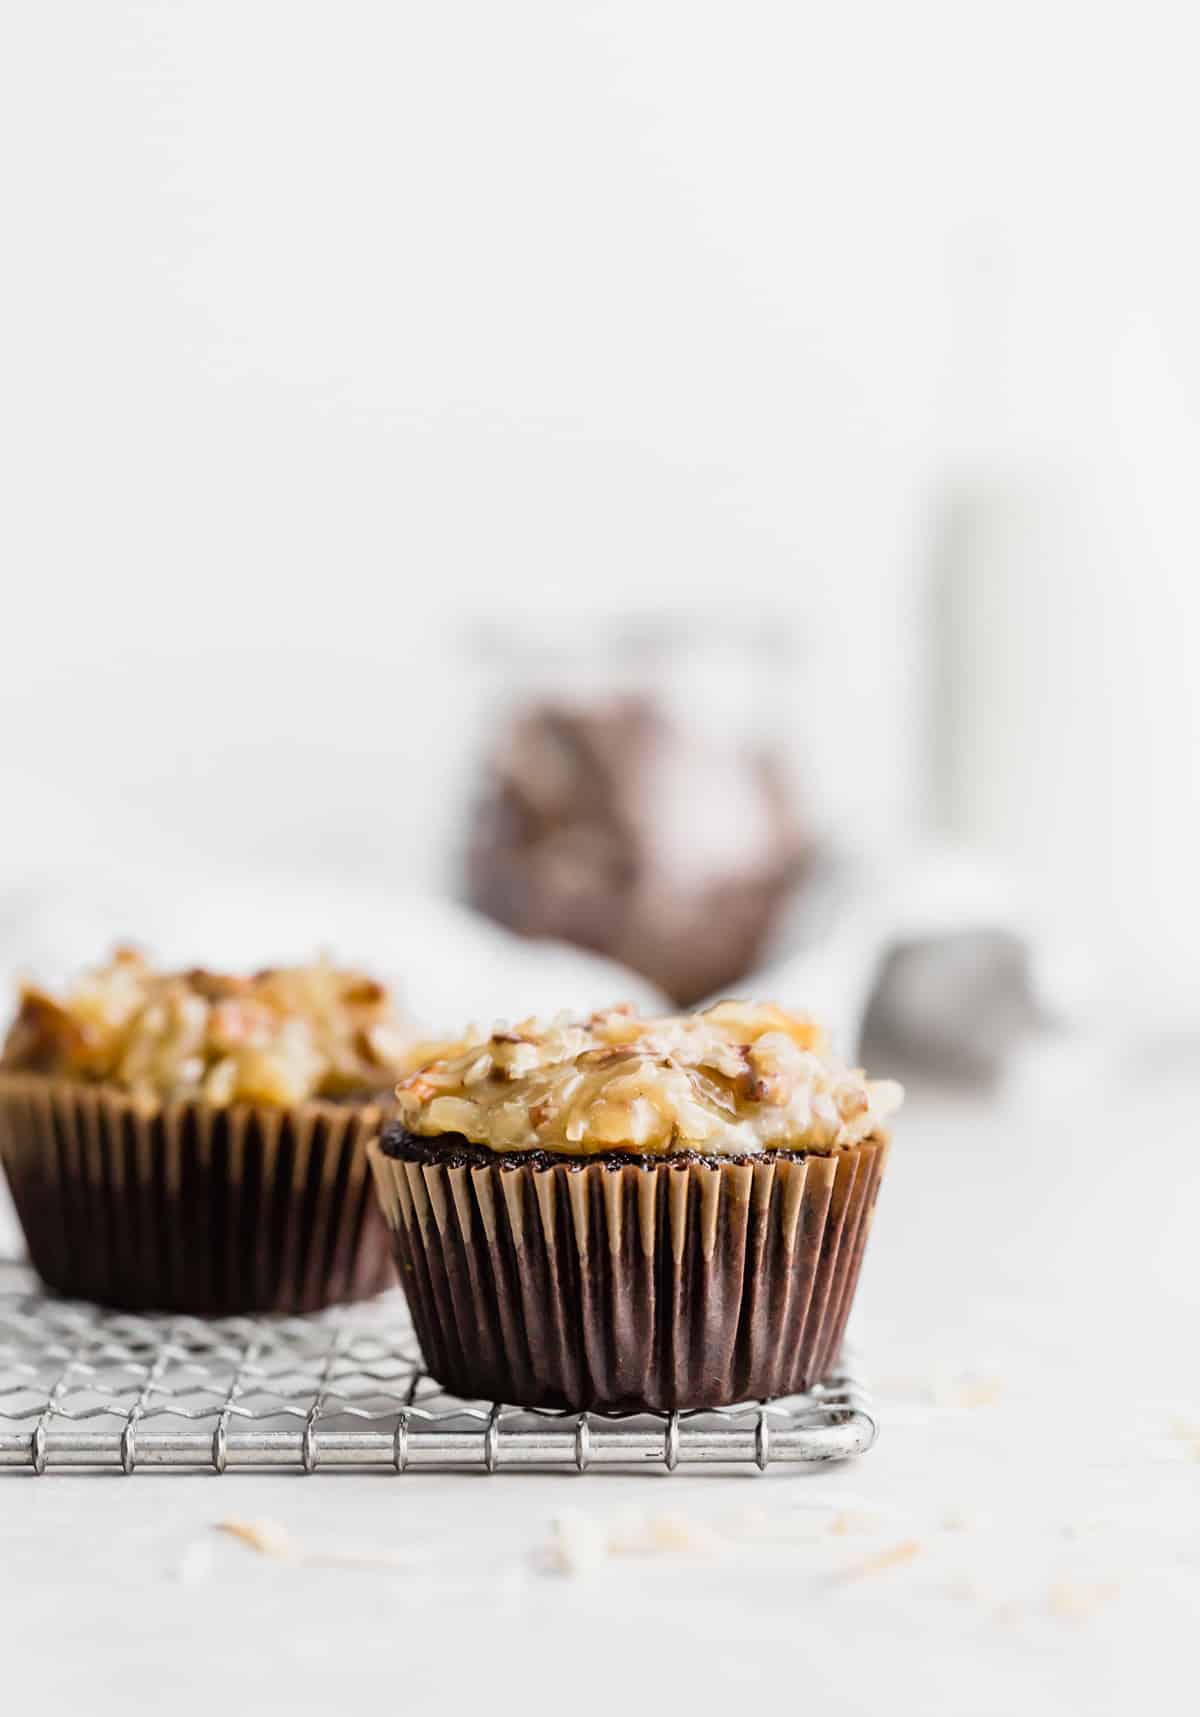 A frosted German Chocolate Cupcake against a white background.